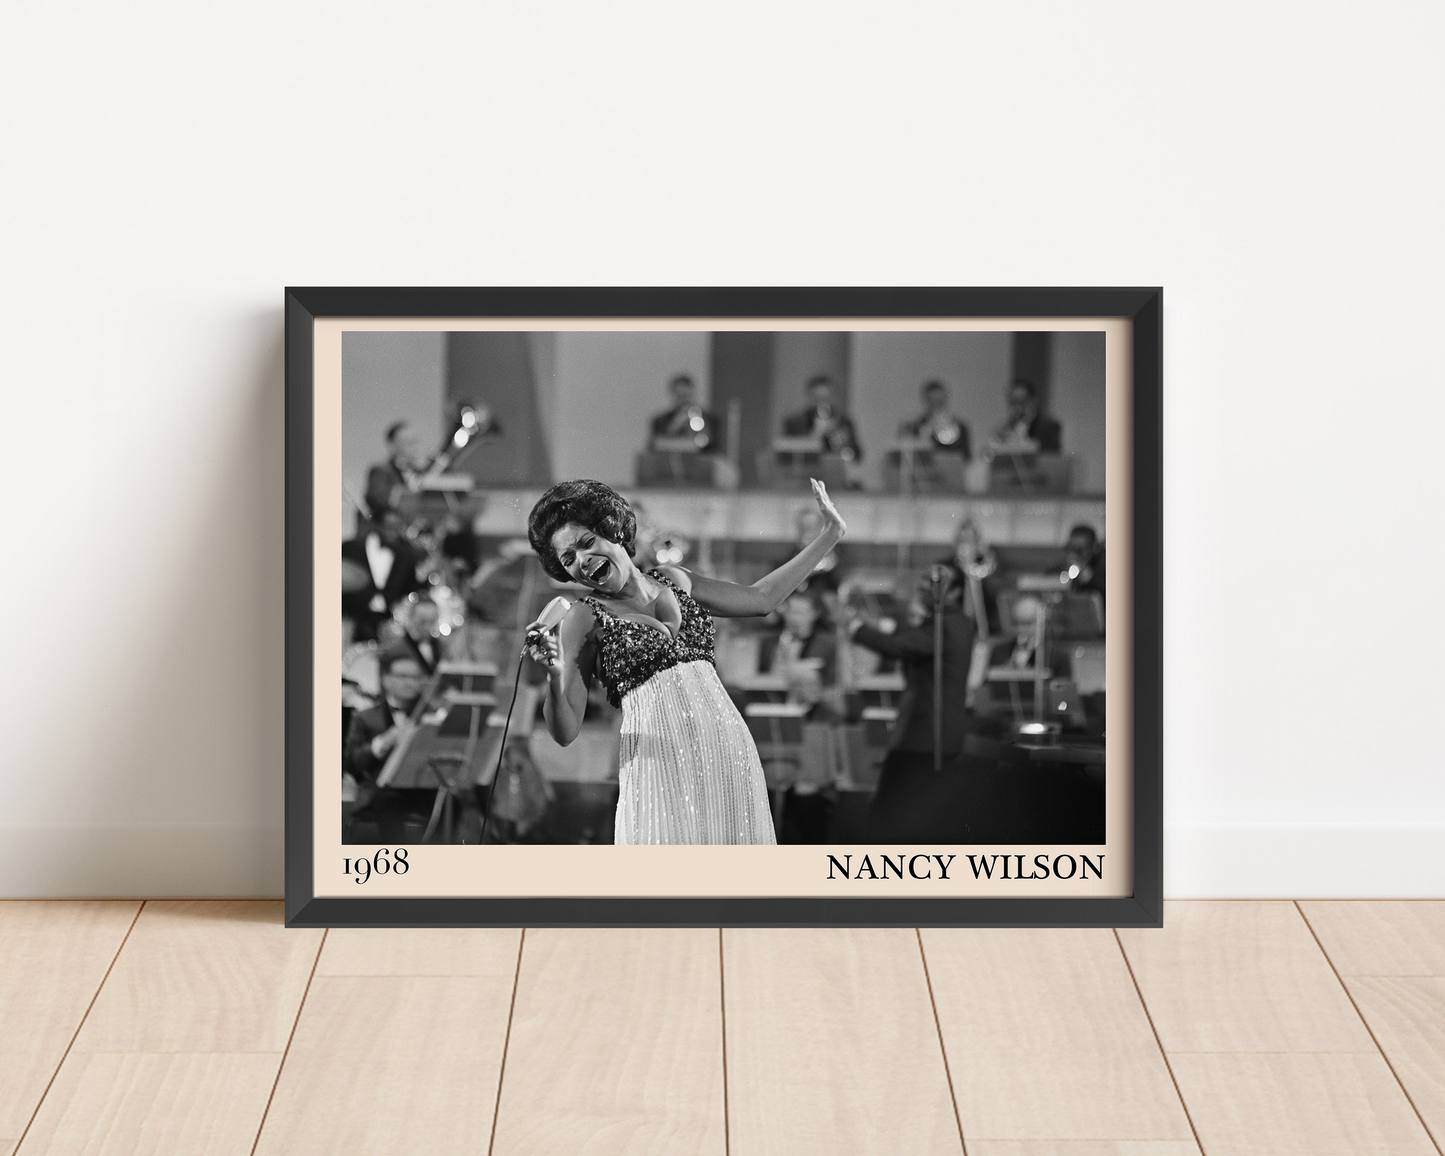 1968 picture of Nancy Wilson singing. Picture crafted into a black framed poster, with an off-white border. Poster is propped against a white wall